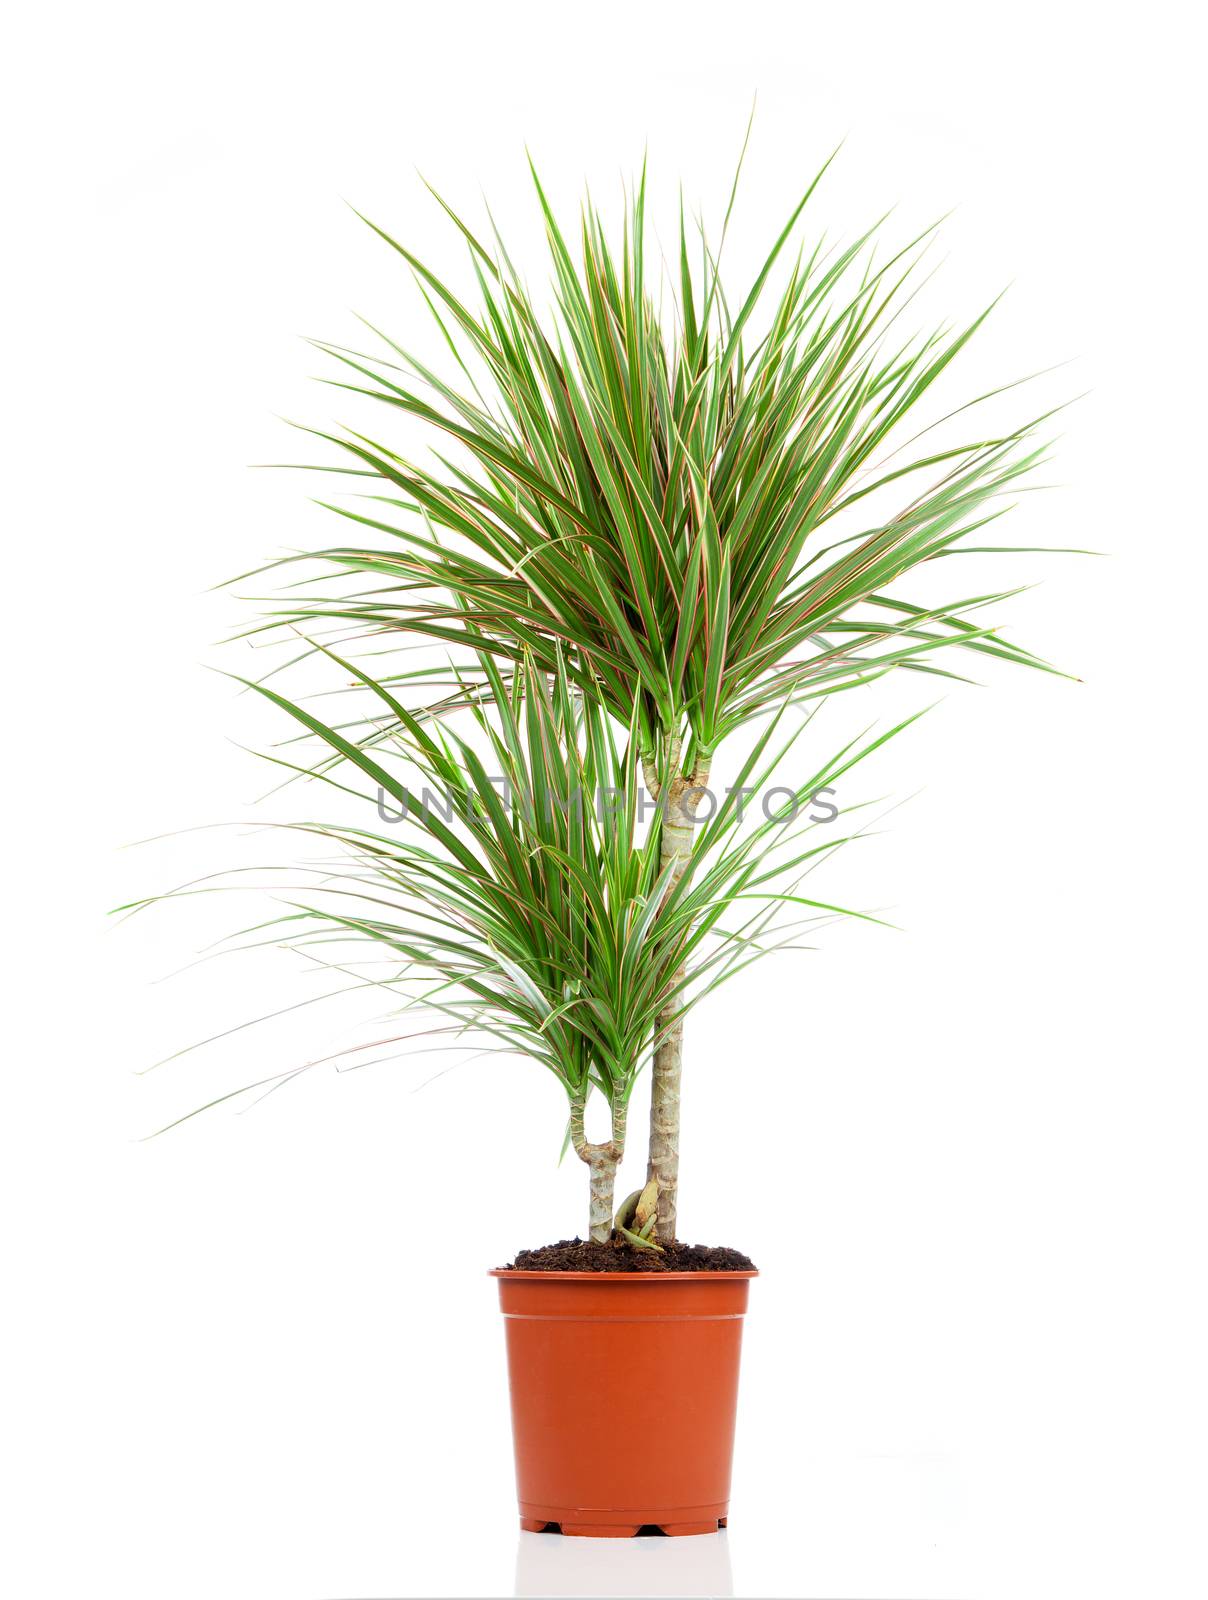 Dracaena in a pot on a white background by motorolka